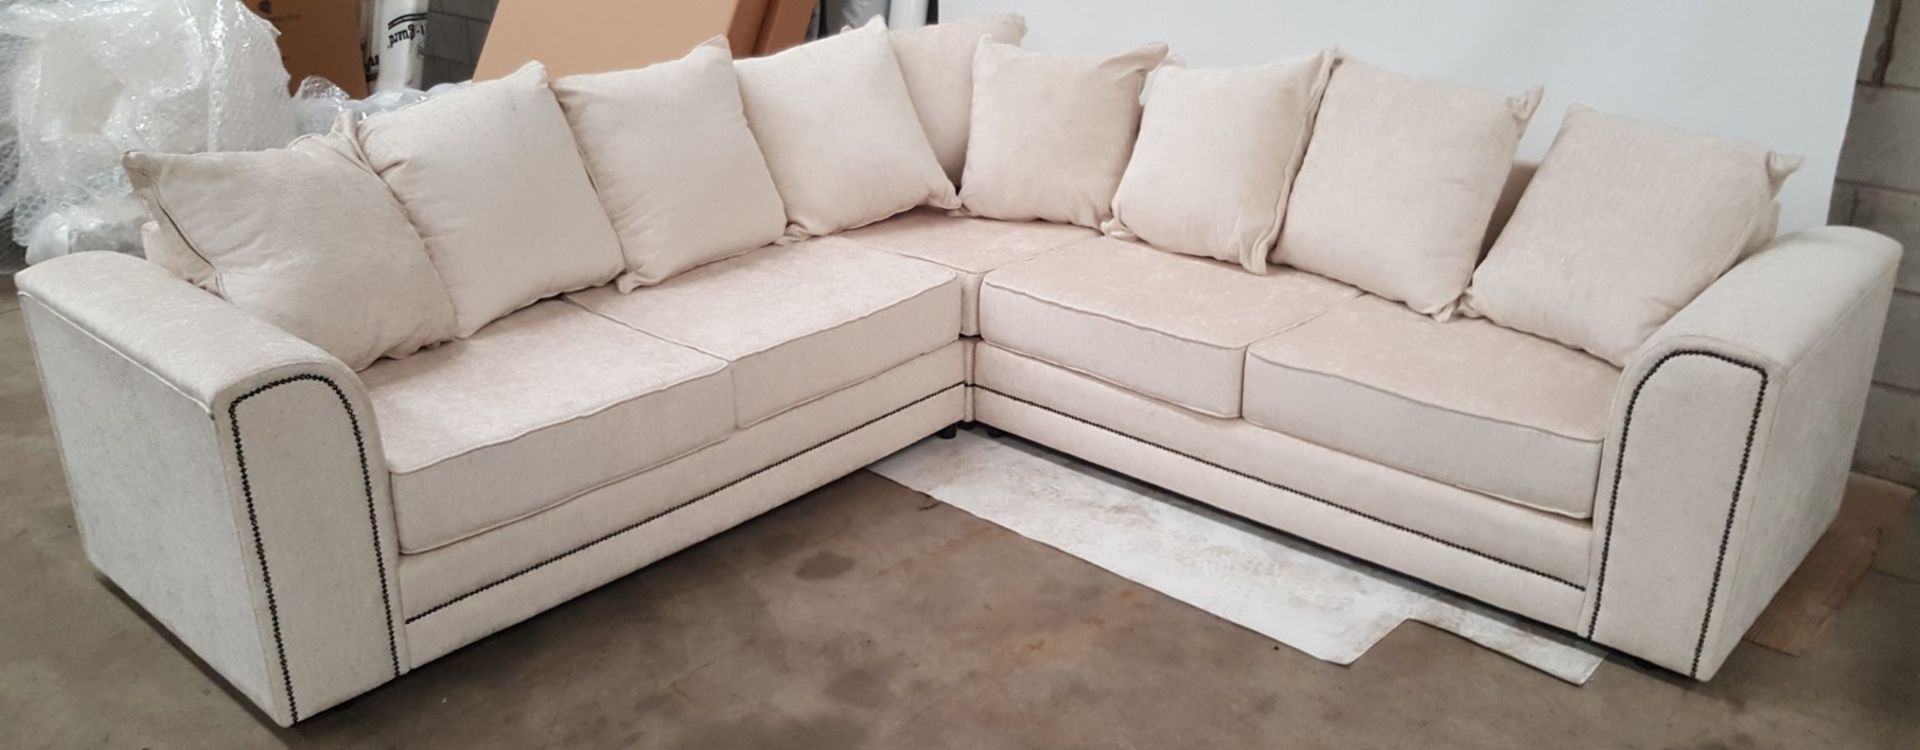 1 x Luxurious Pearl White Fabric L-Shaped Corner Seater Sofa - Ref BY198